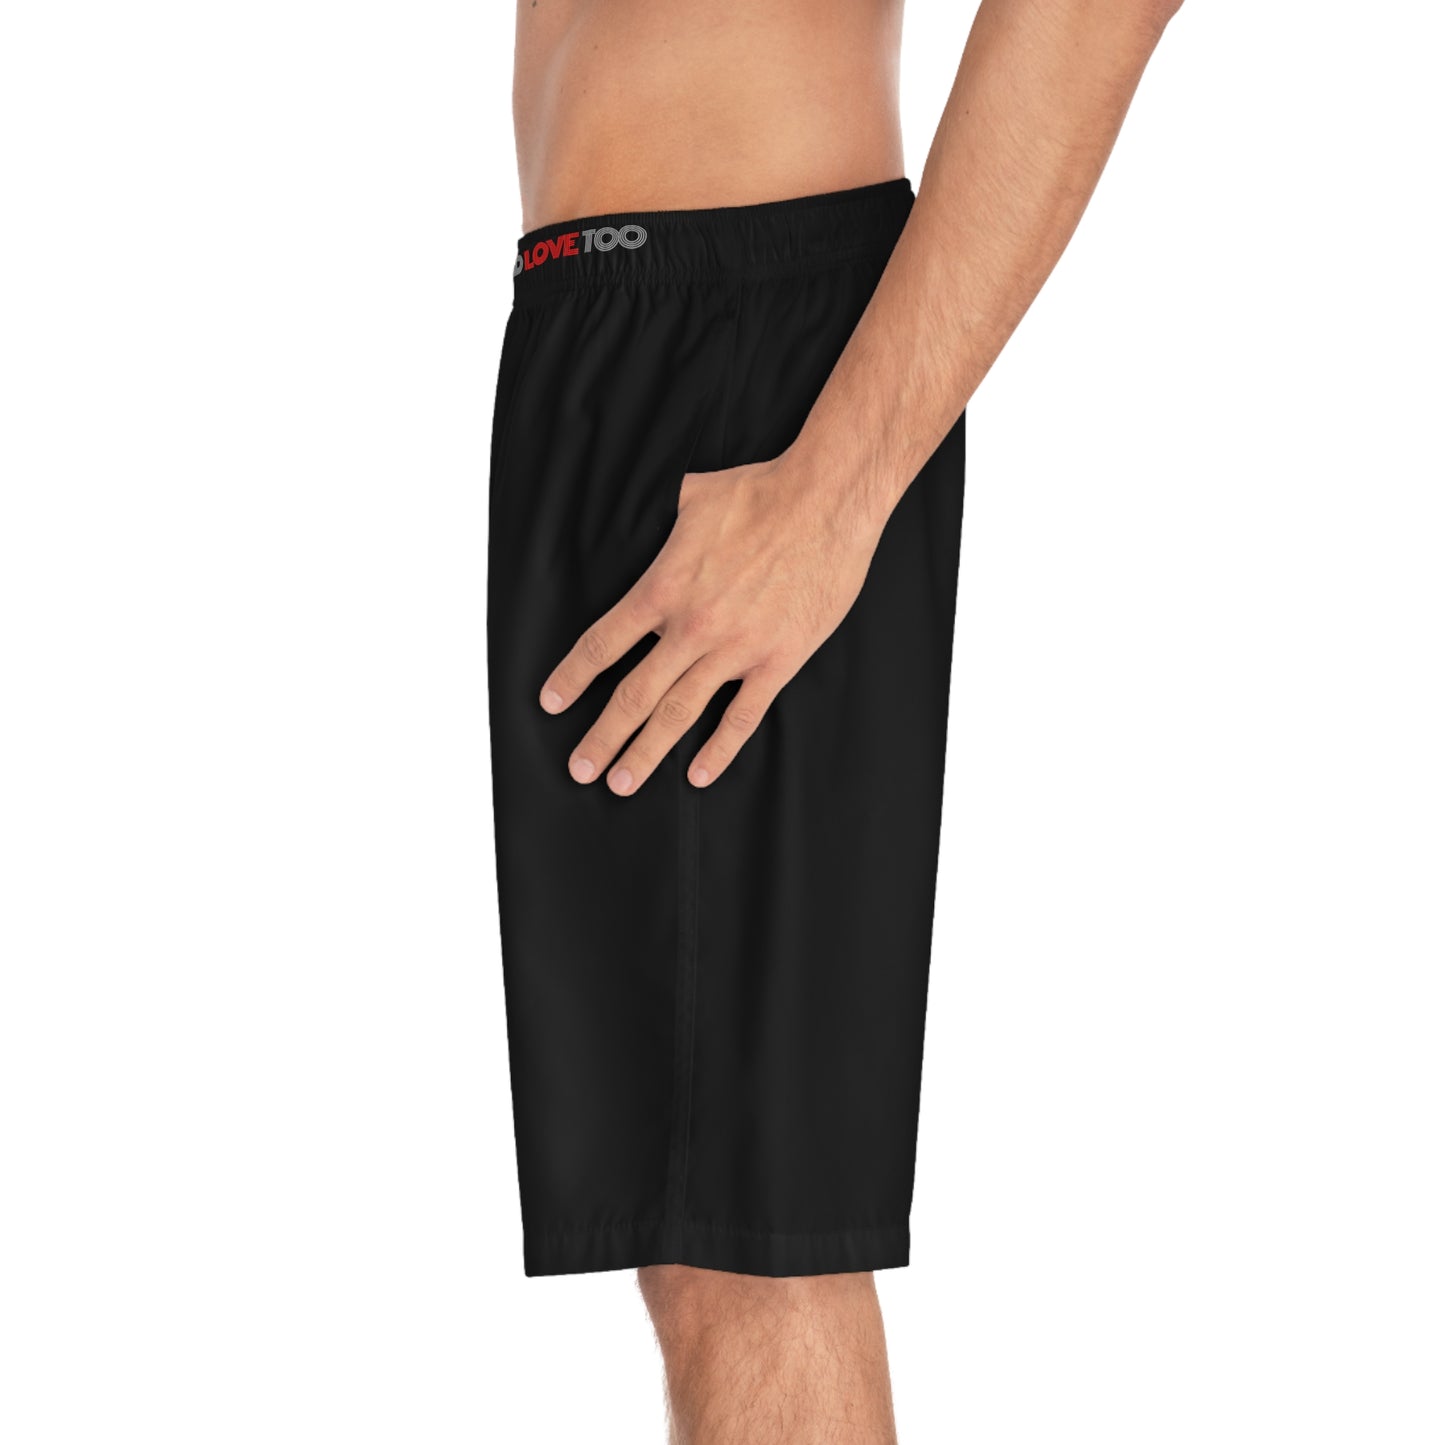 Refs Need Love Too Men's Board Shorts With Pockets | Available in Black only | Great gift for Refs | For Sports Officials | Great shorts for swimmers | Make a statement at the beach